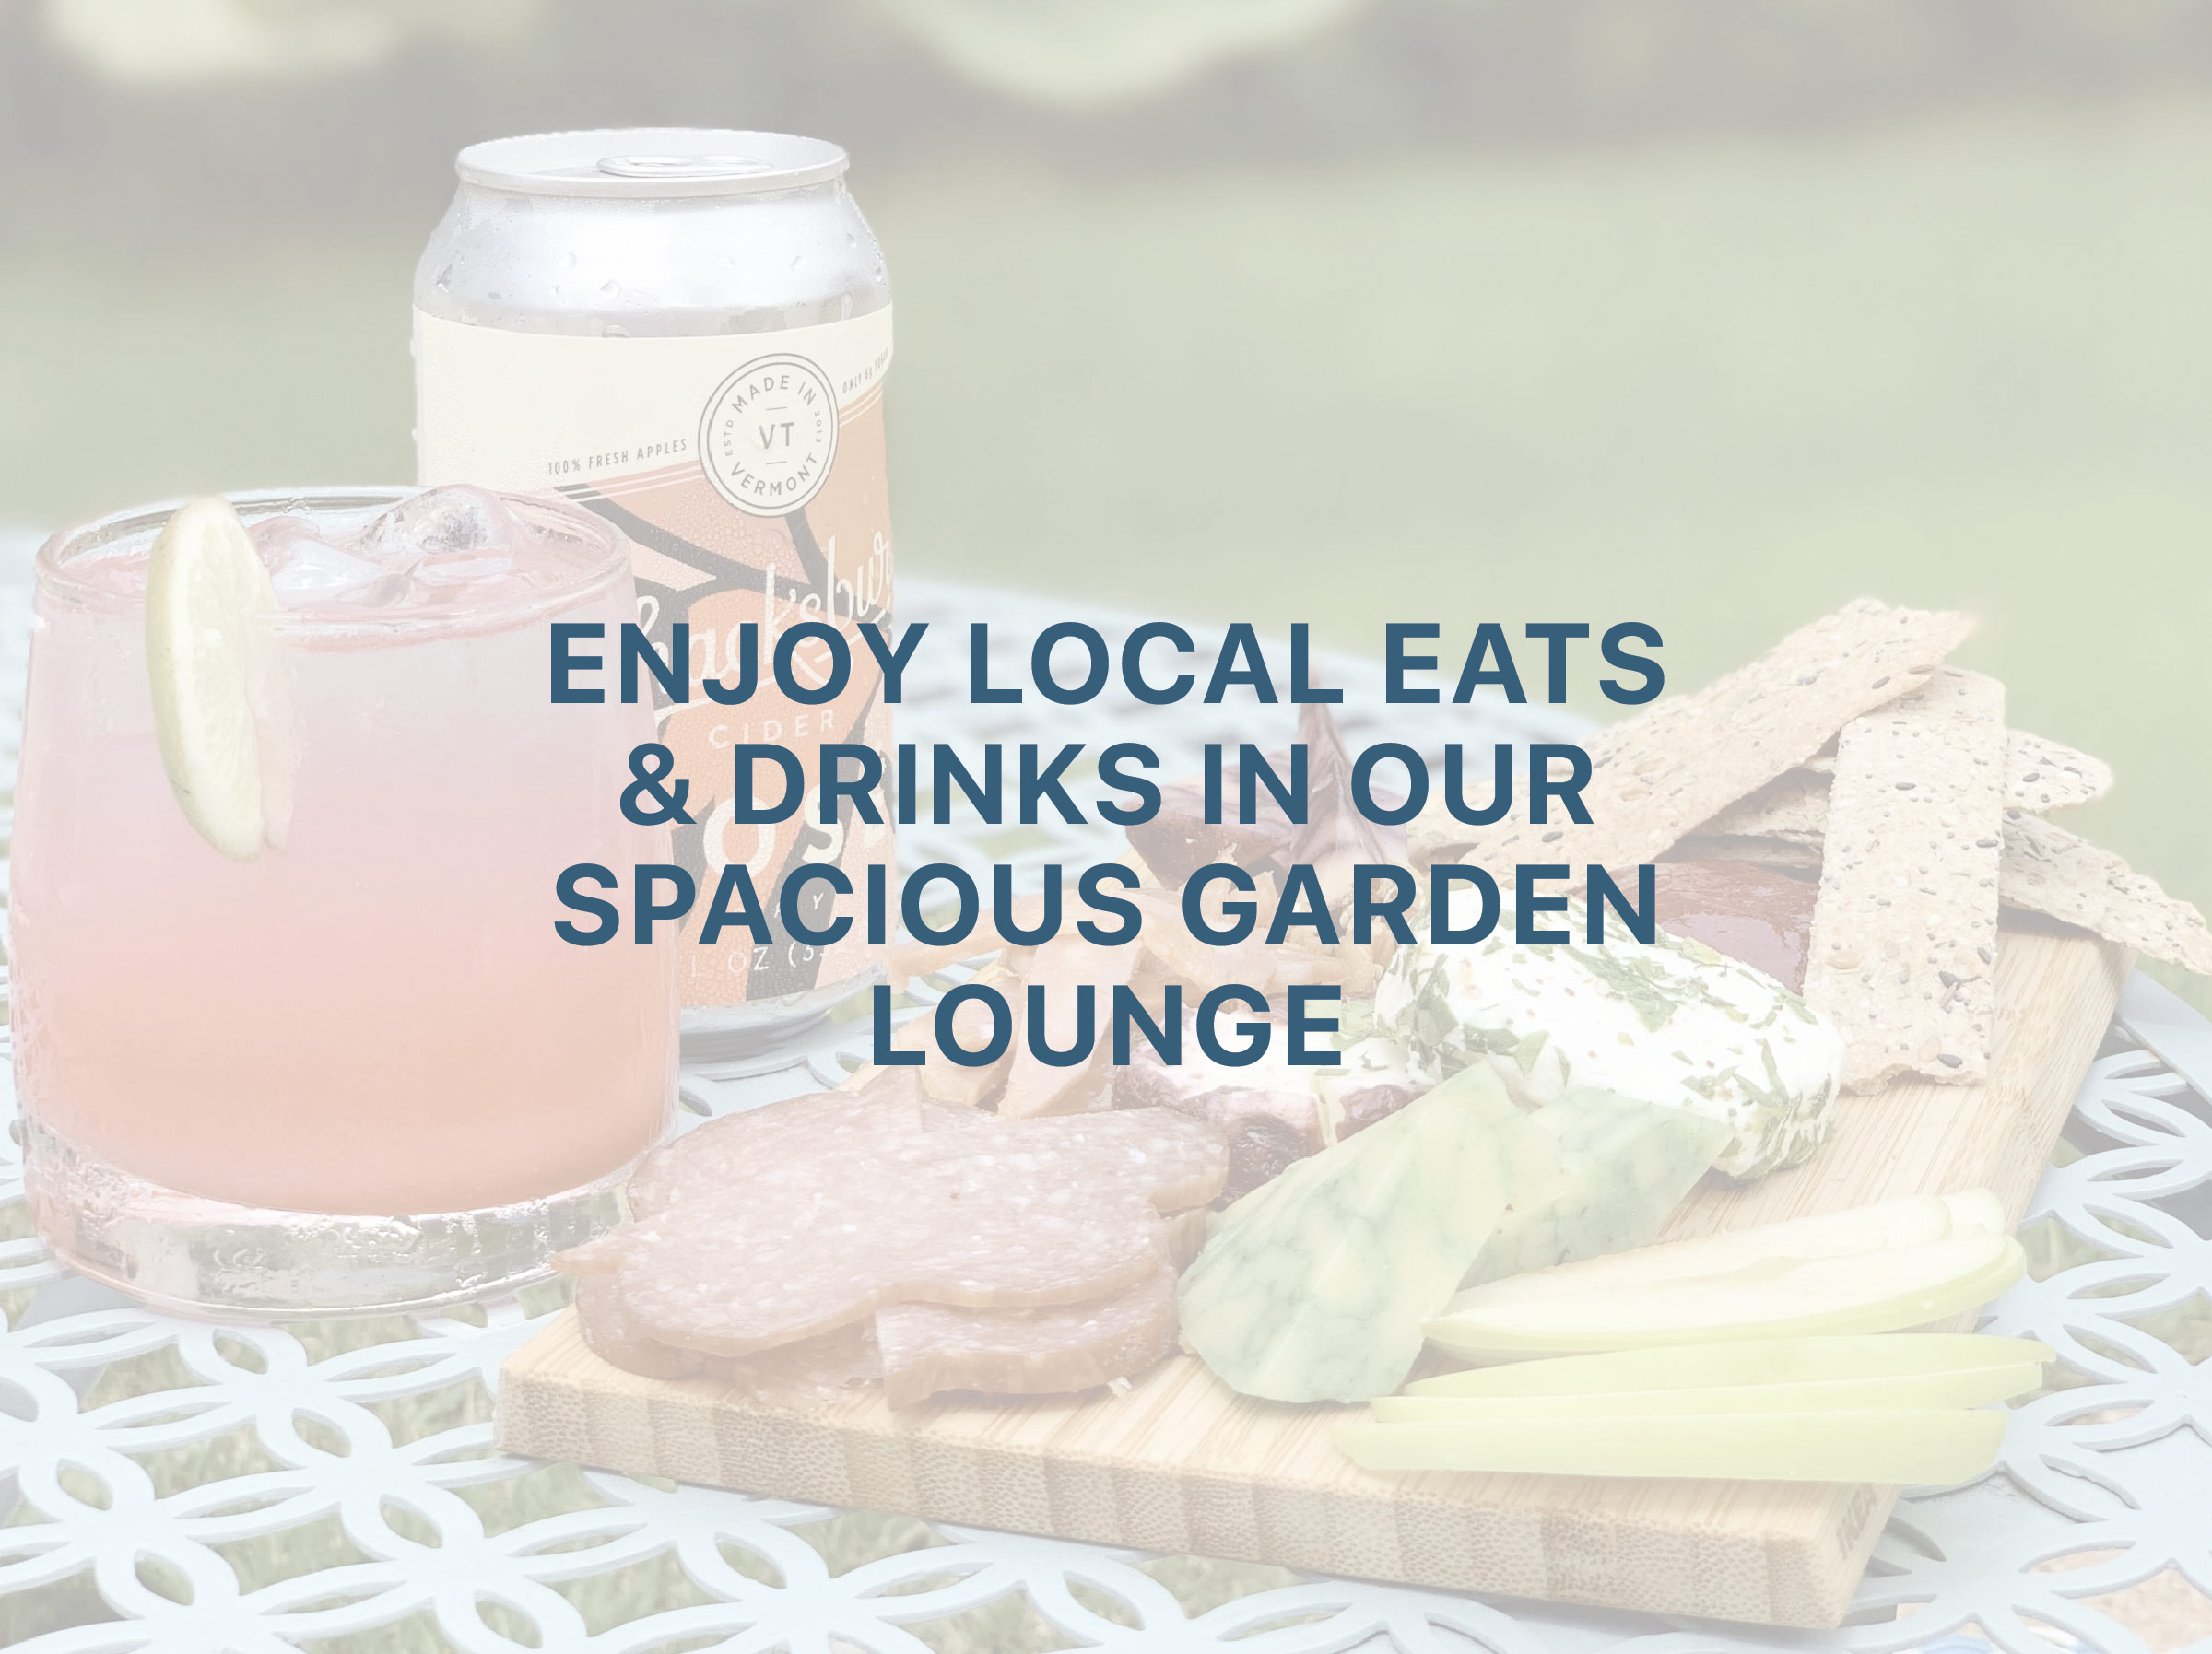 Enjoy Local Eats & Drinks in our Spacious Garden Lounge